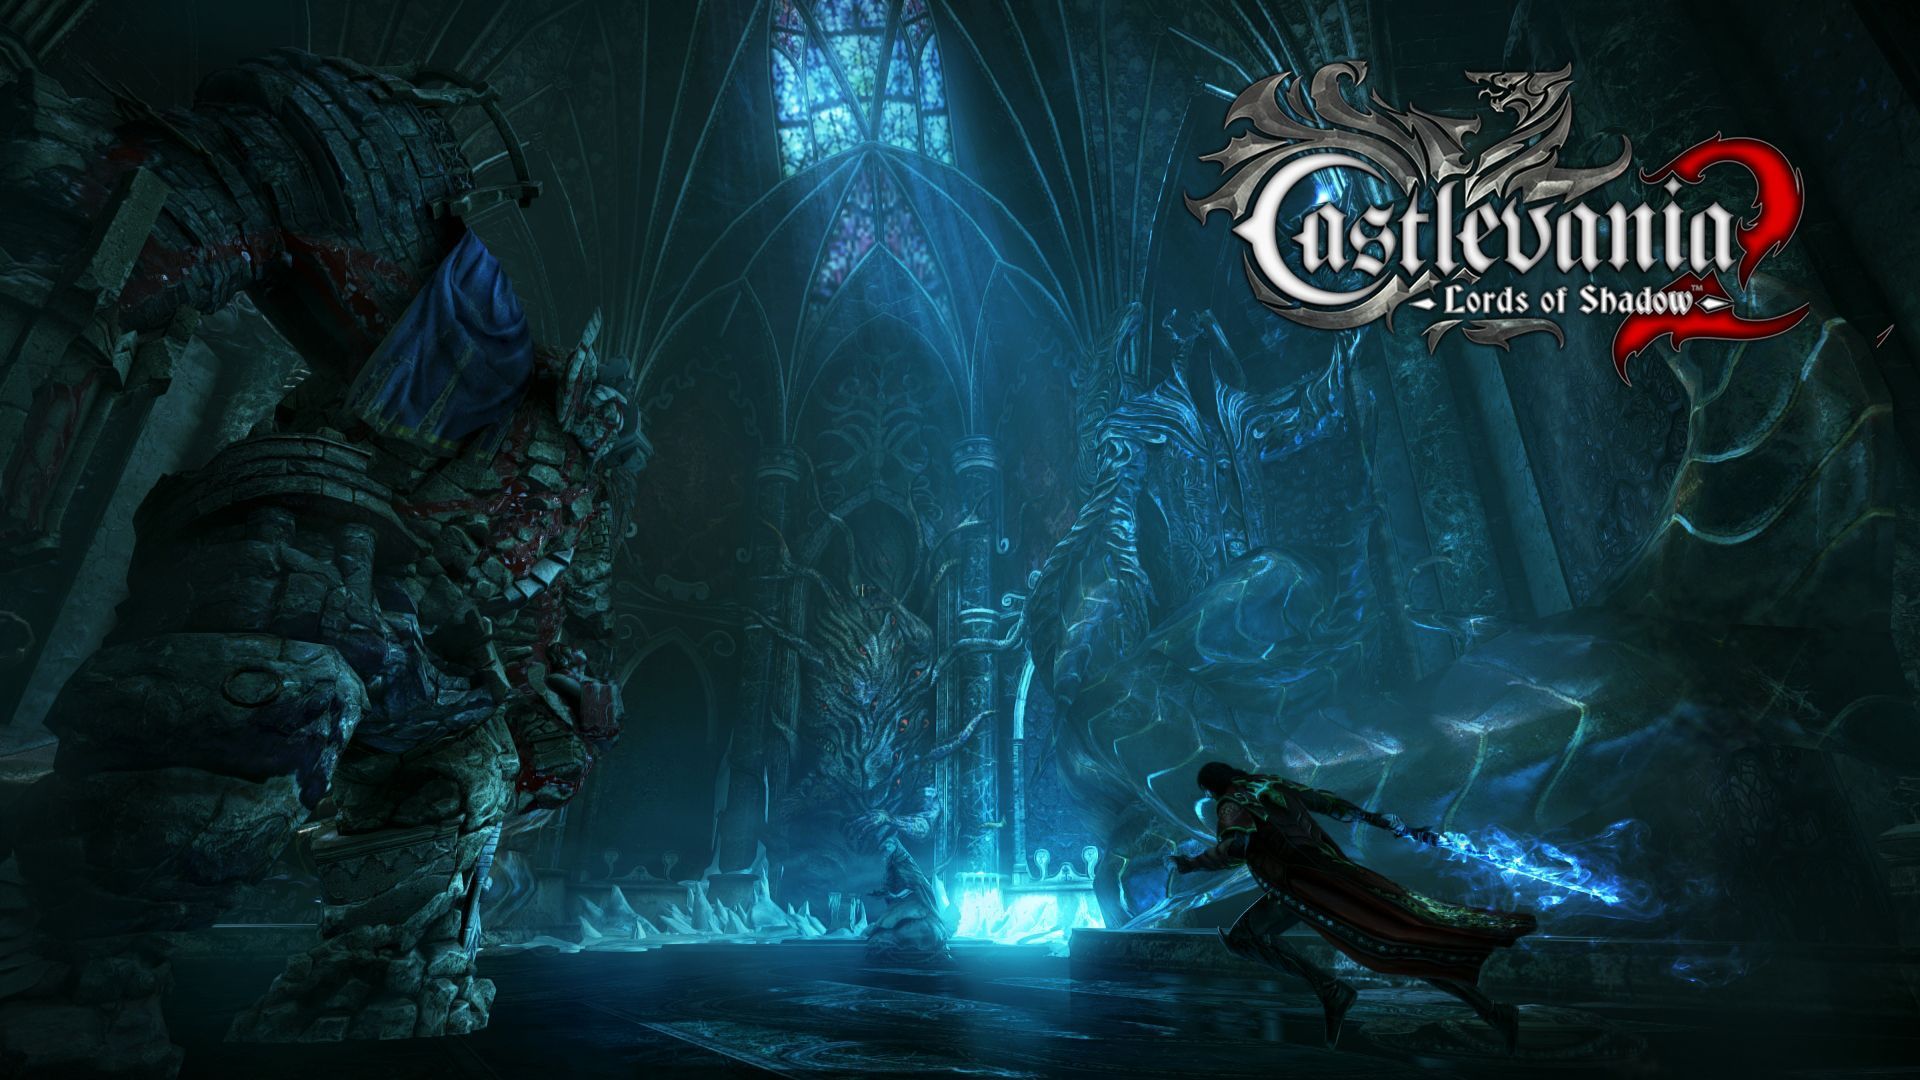 Download Wallpaper 1920x1080 Castlevania lords of shadow 2 ...